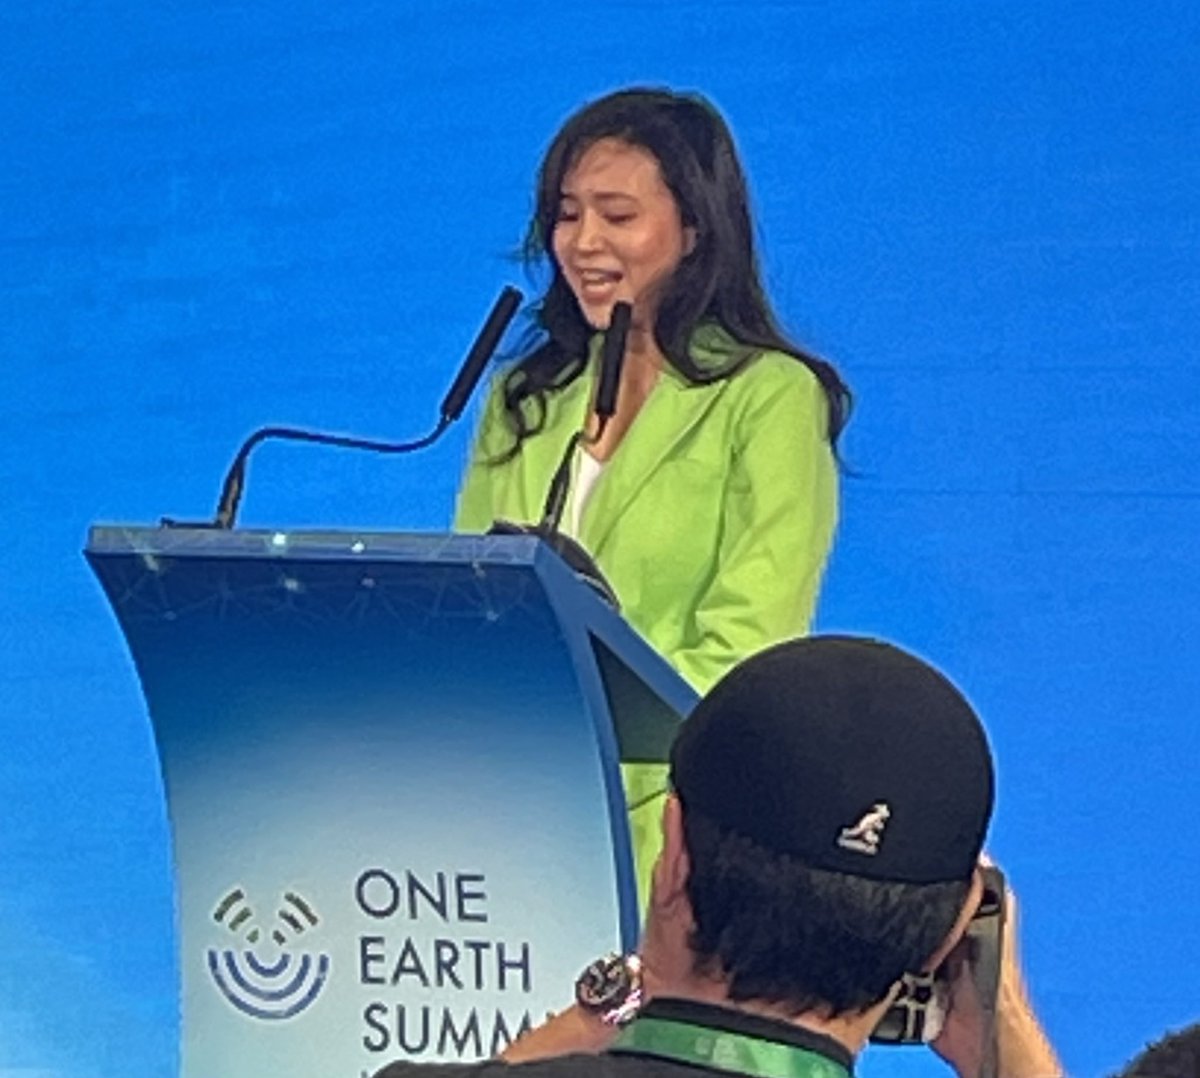 Along with being a third-generation leader in her family companies, Poman Lo is a professor, NGO founder, philanthropist and leader in sustainability who brought together WEF and HK officials to launch the One Earth Summit.